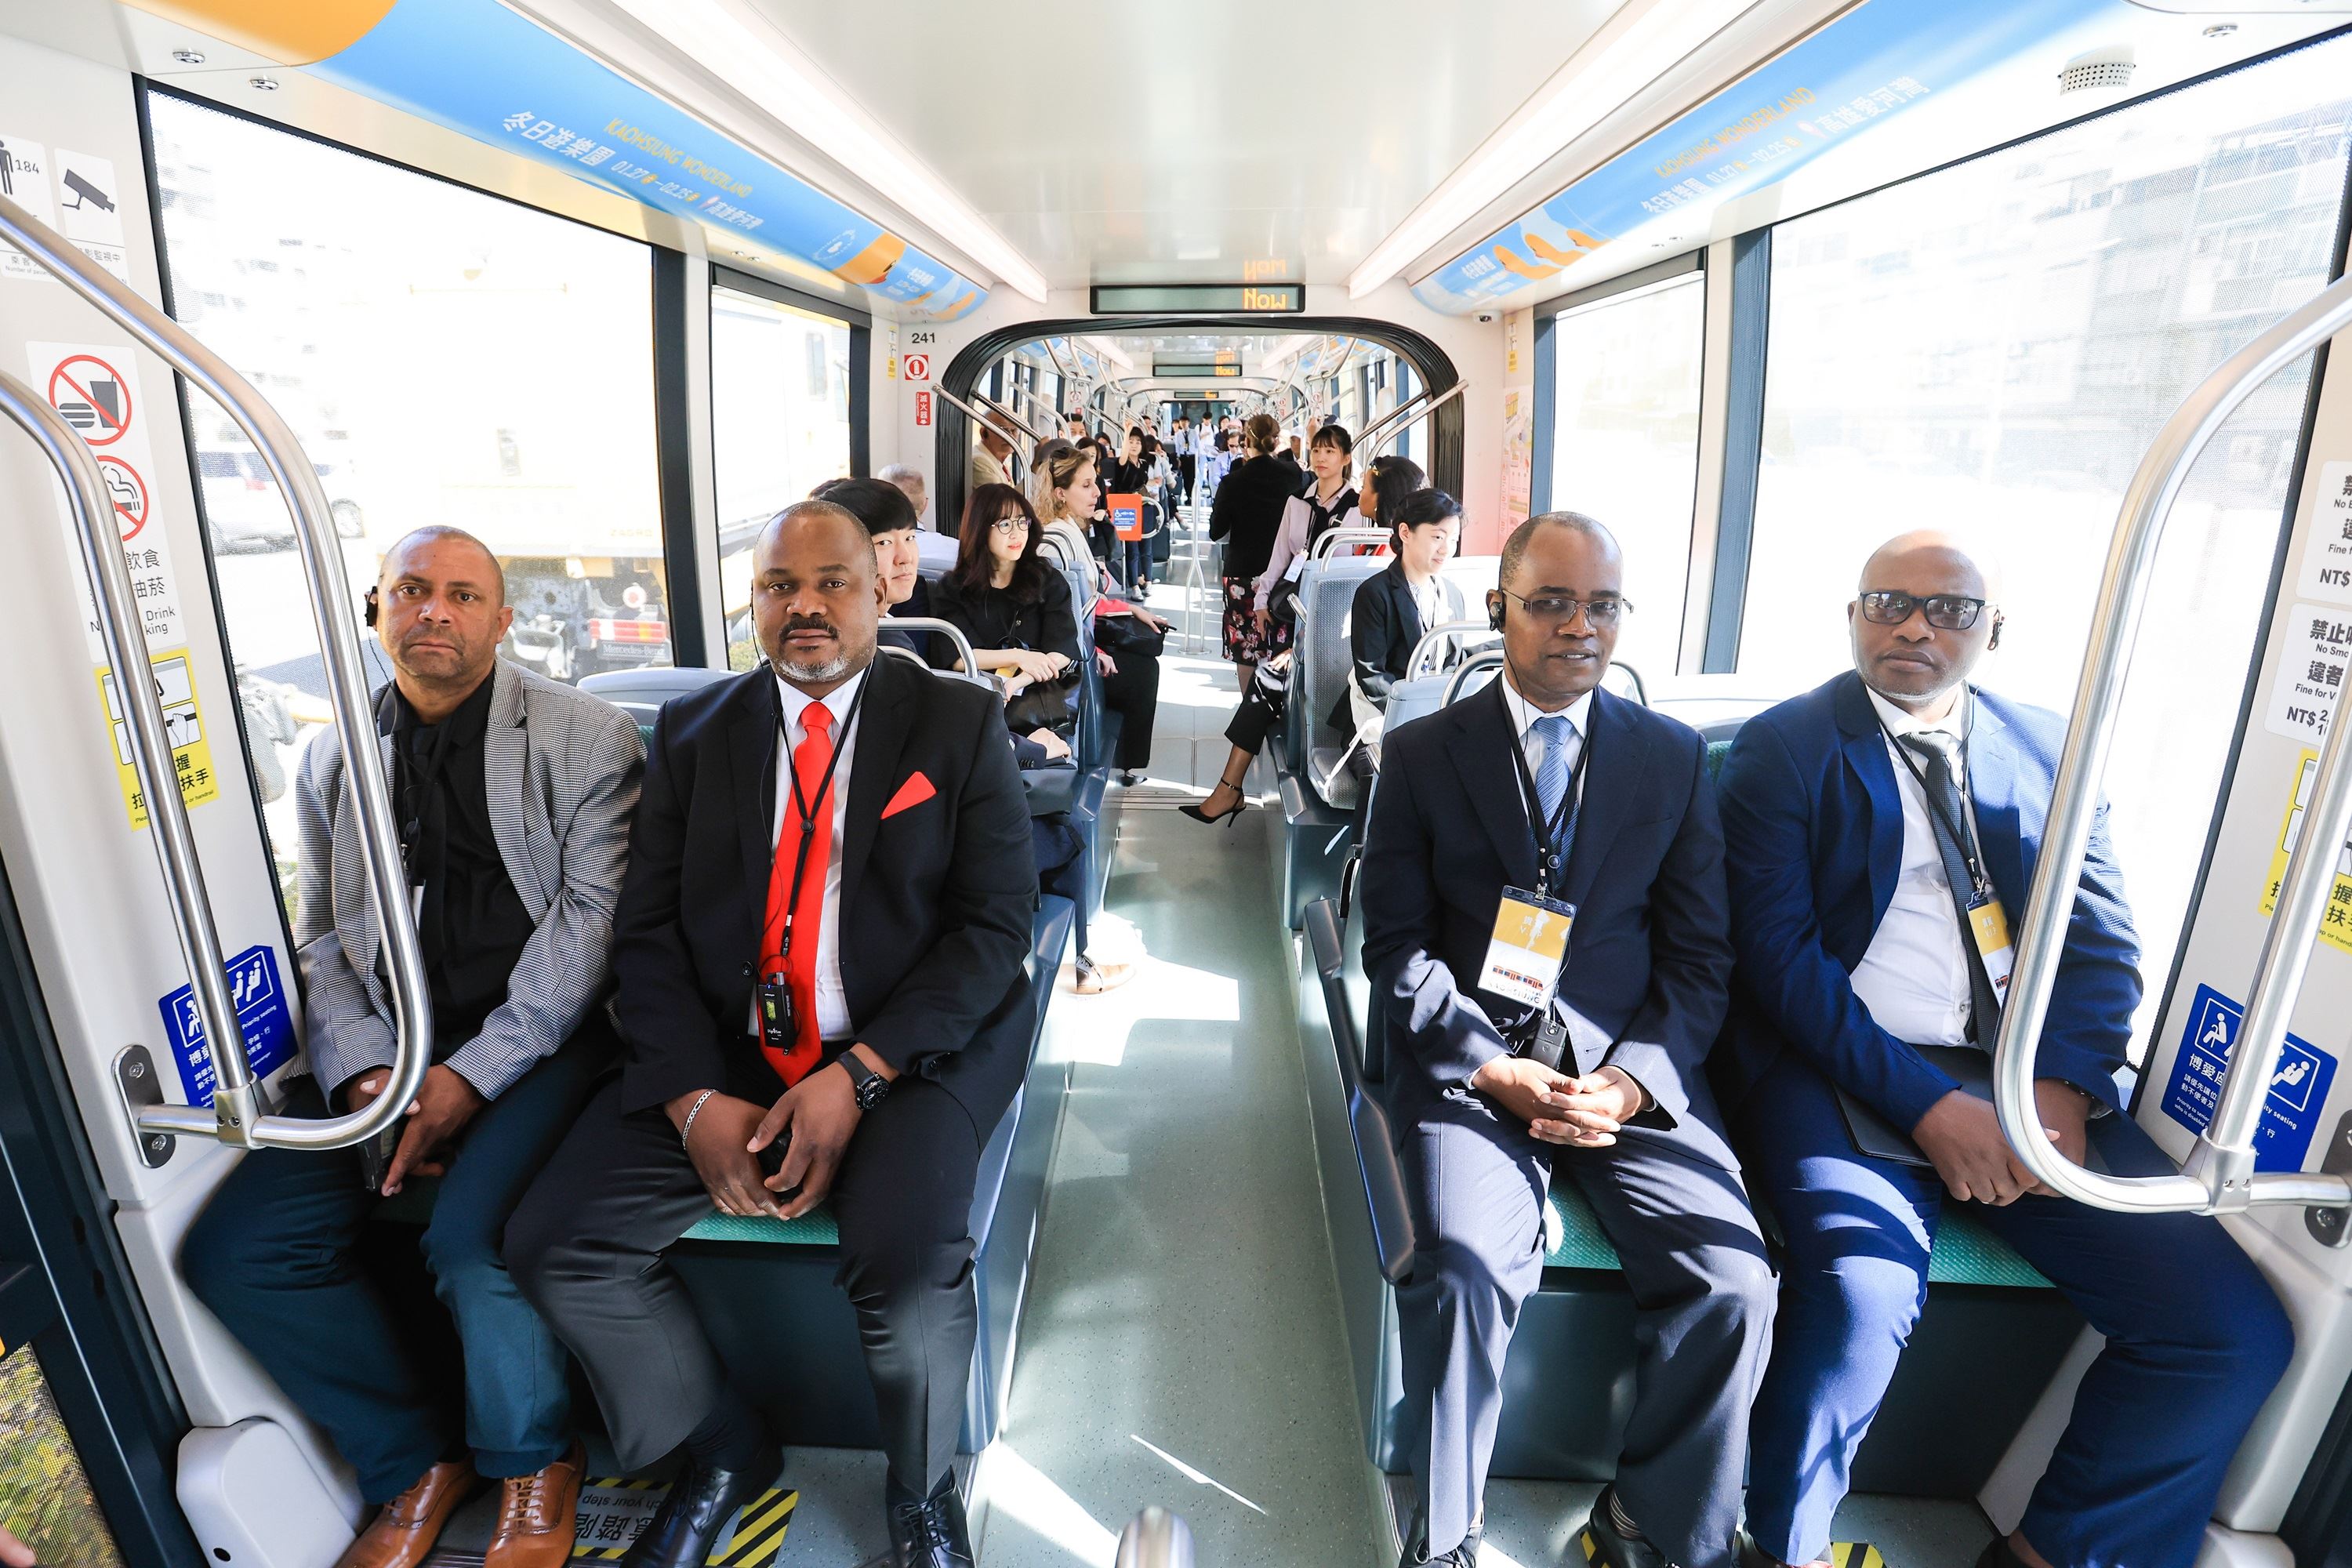 2.Representatives boarded the limited edition of Light Rail